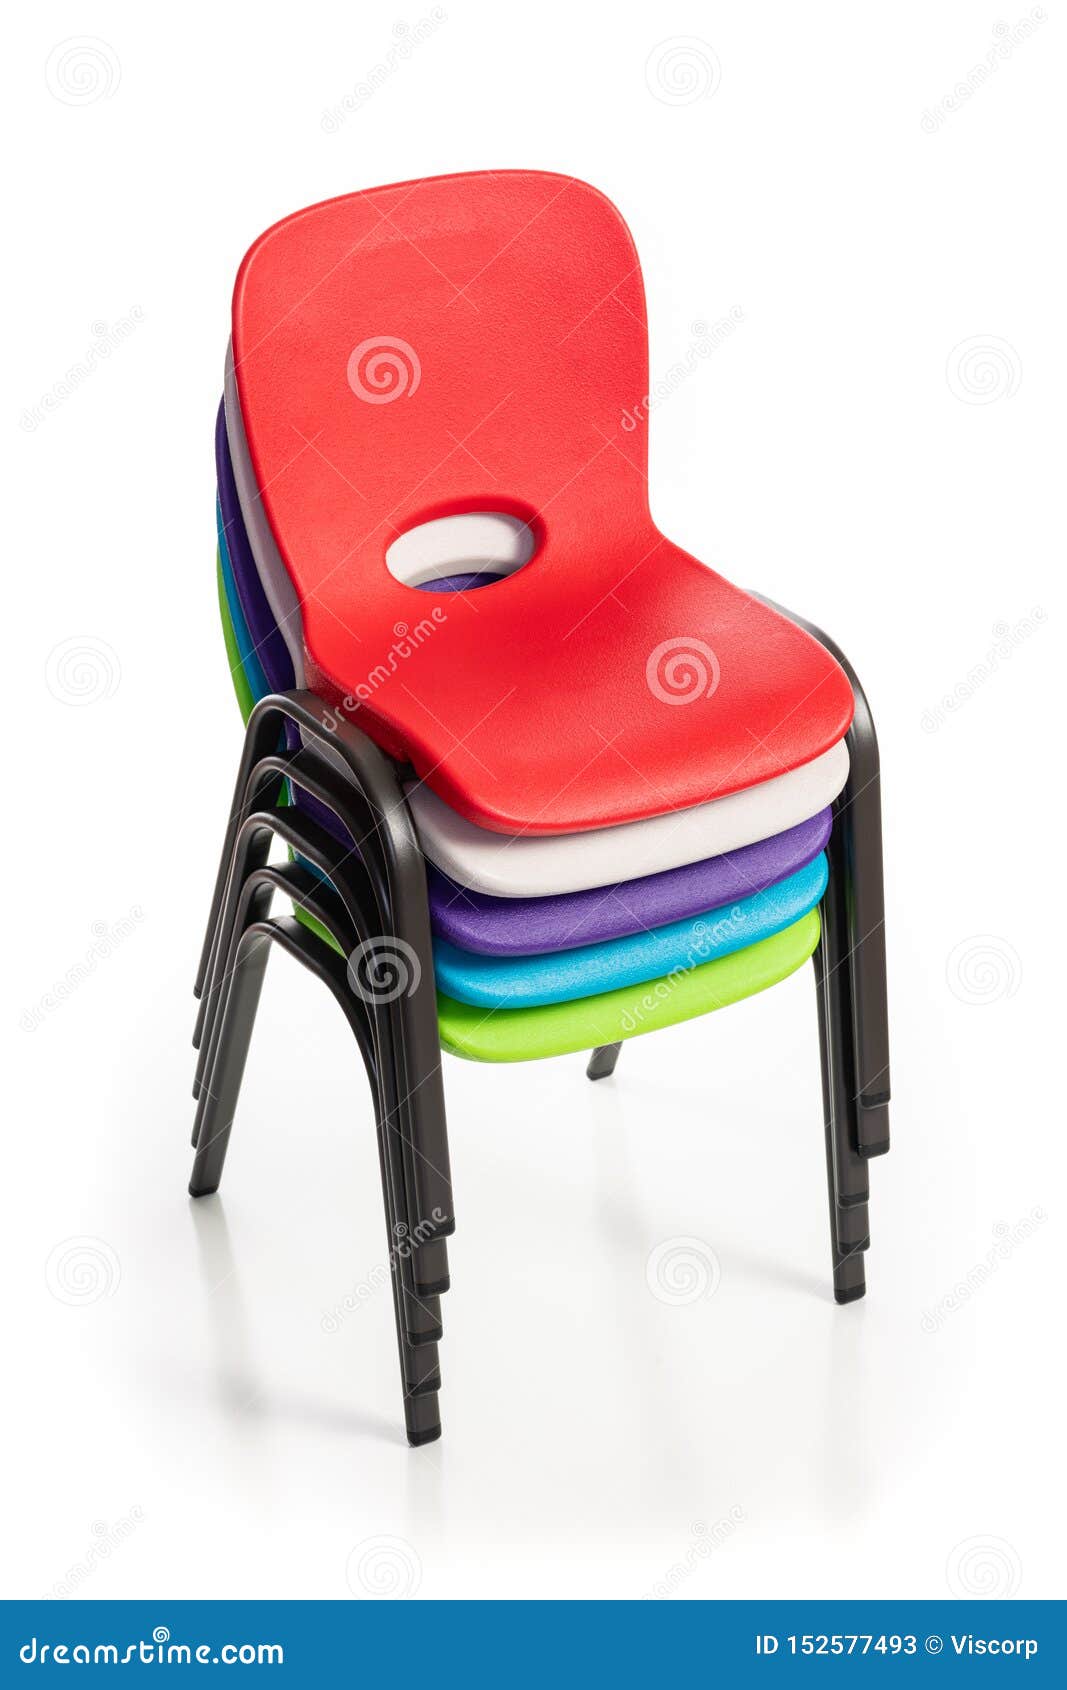 stacked chairs for children